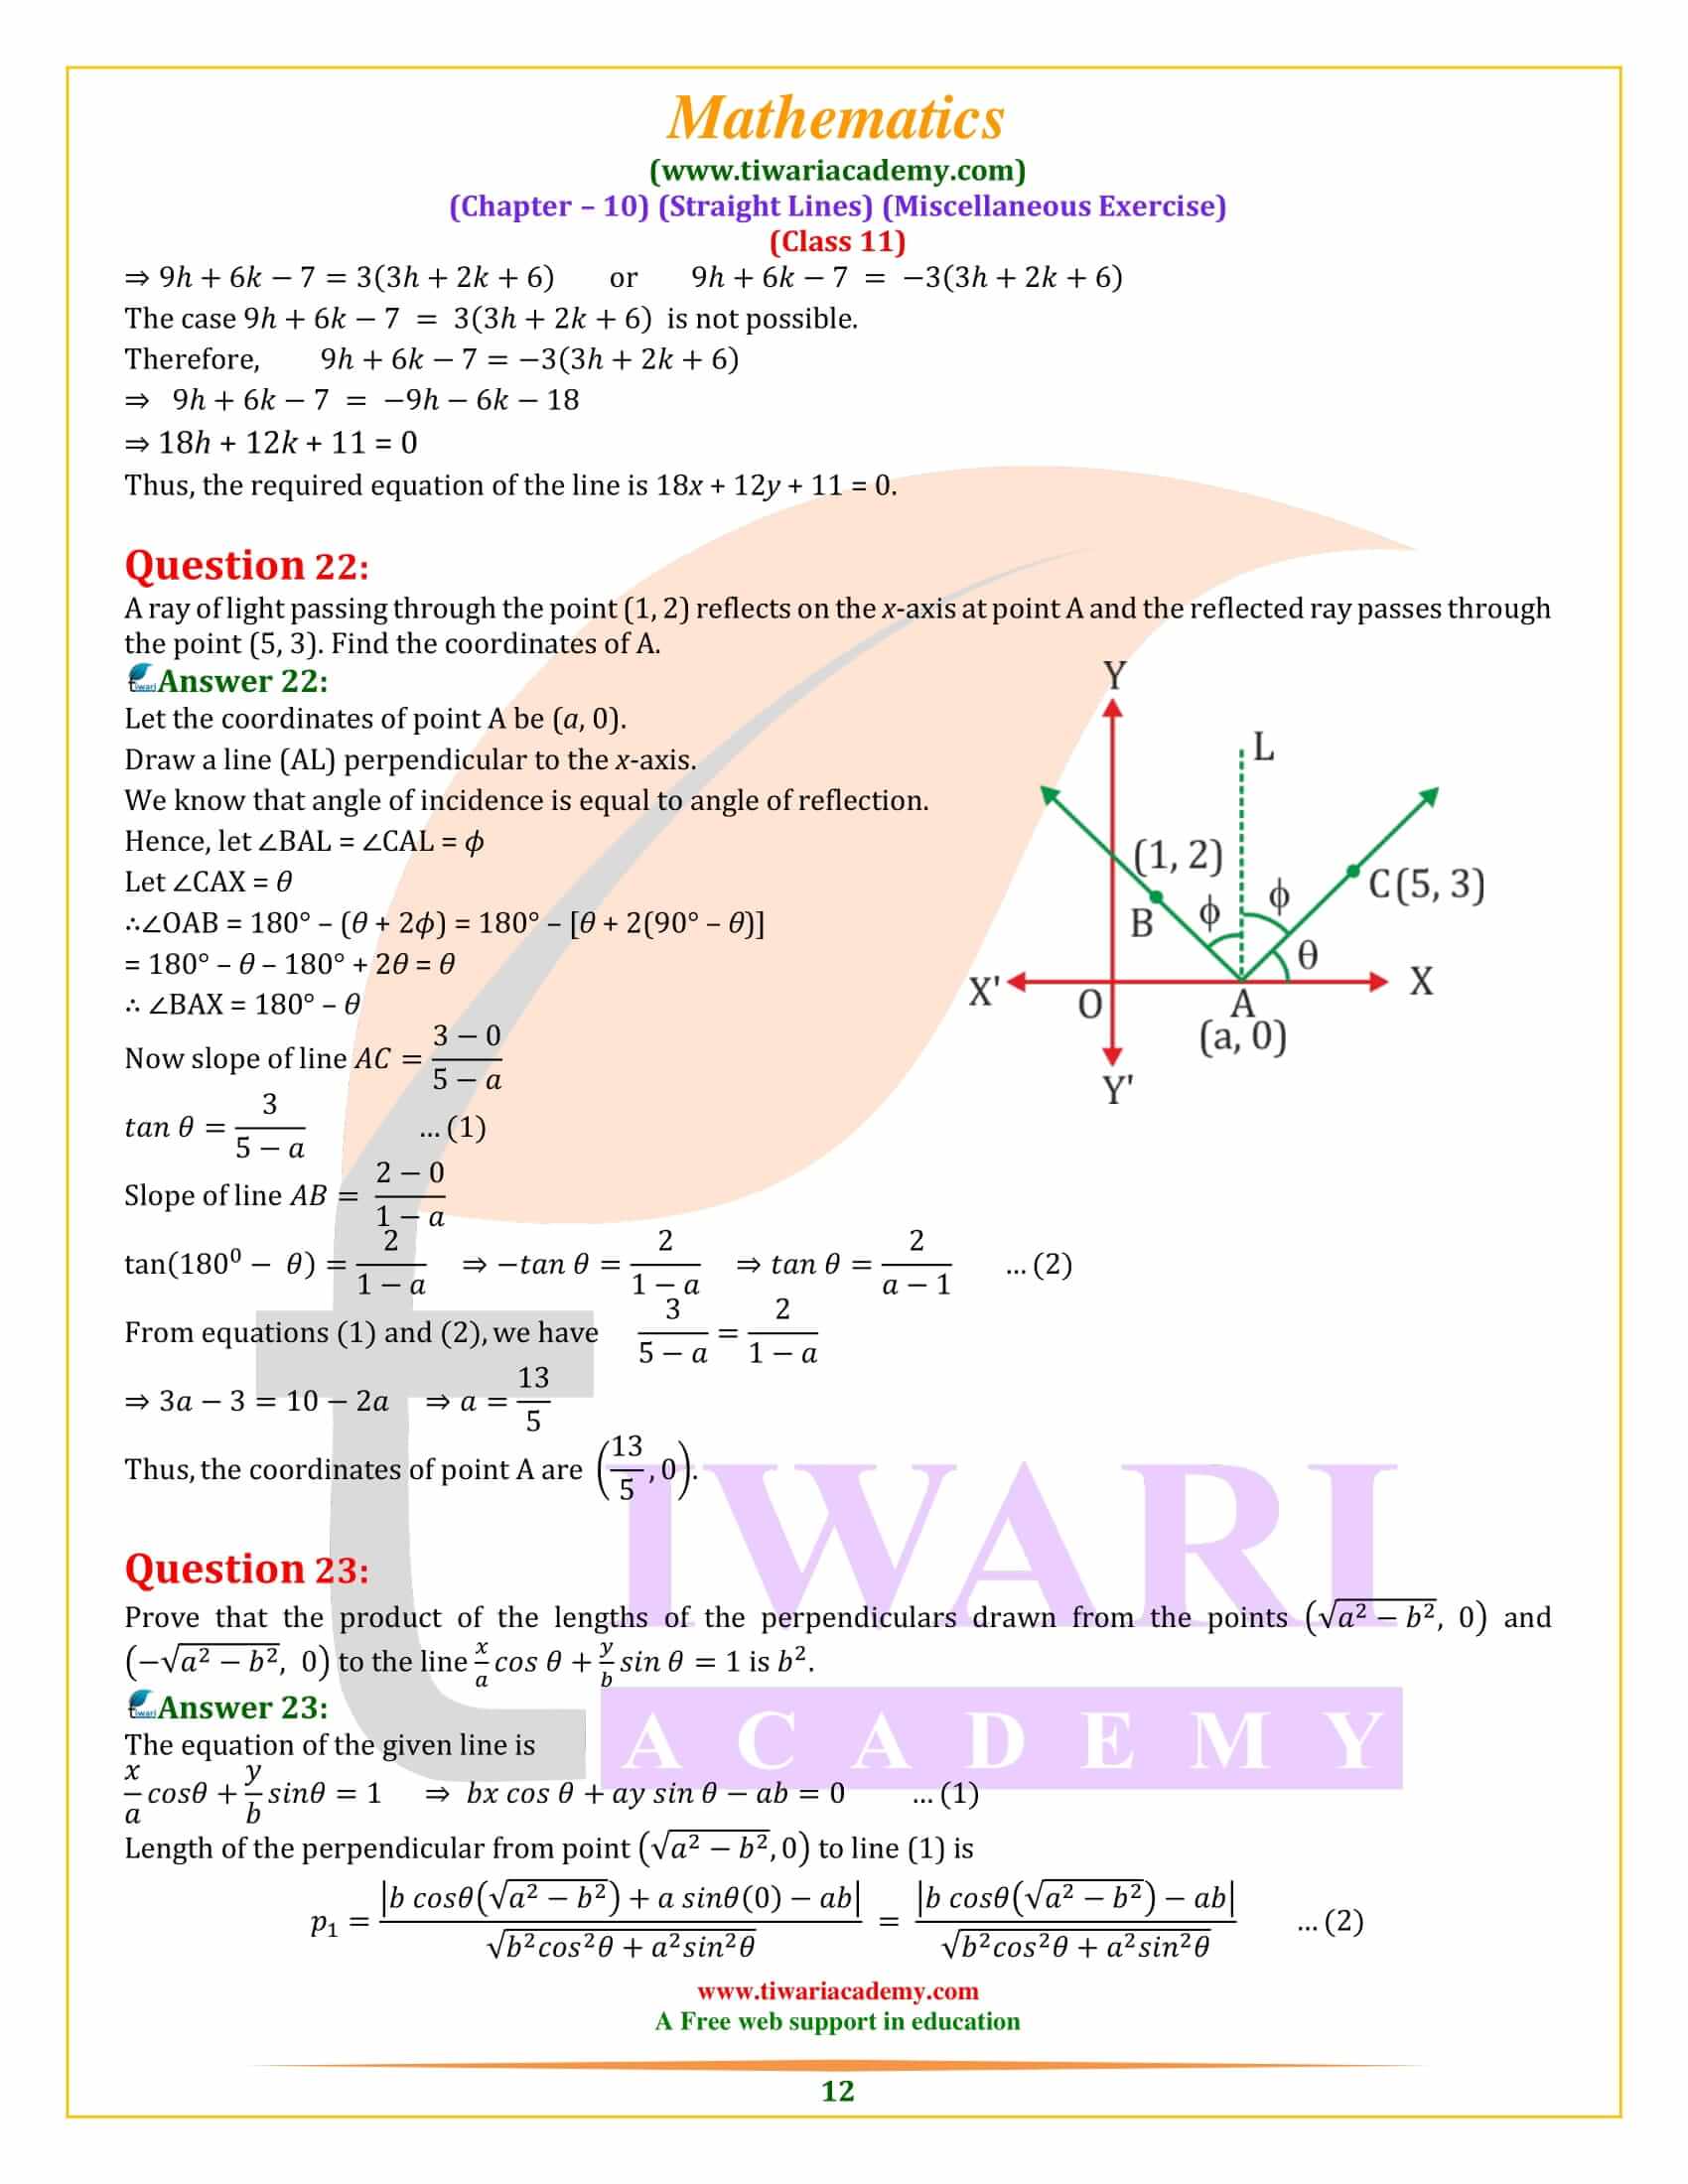 NCERT Solutions for Class 11 Maths Chapter 10 Misc. Exercise